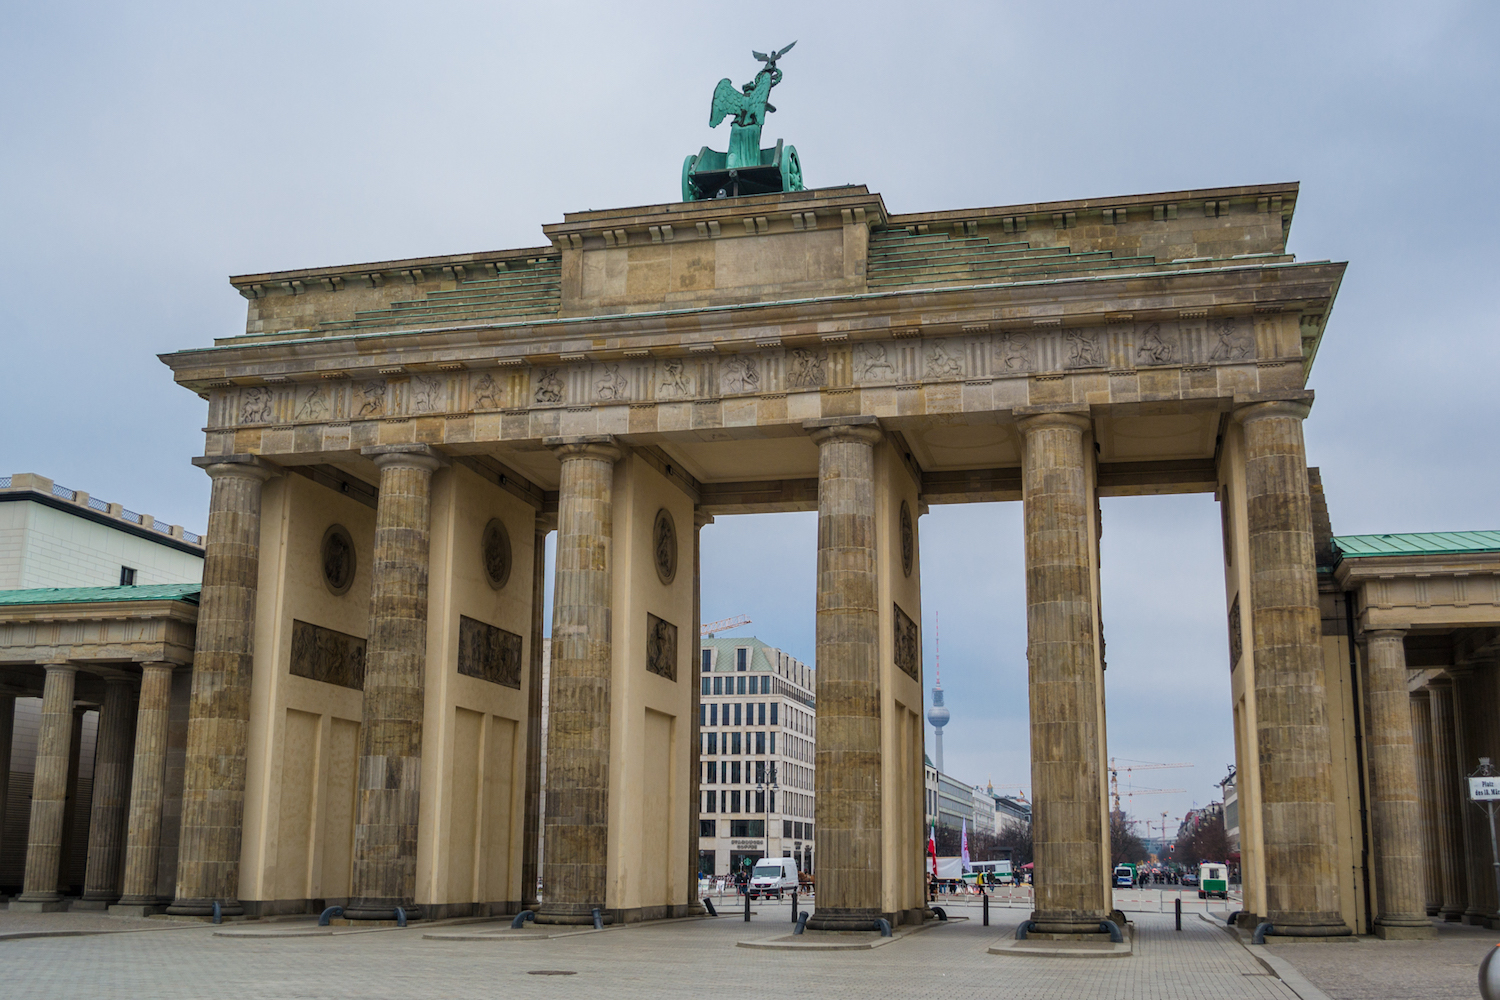 Things to do in Berlin: The Brandenburg gate